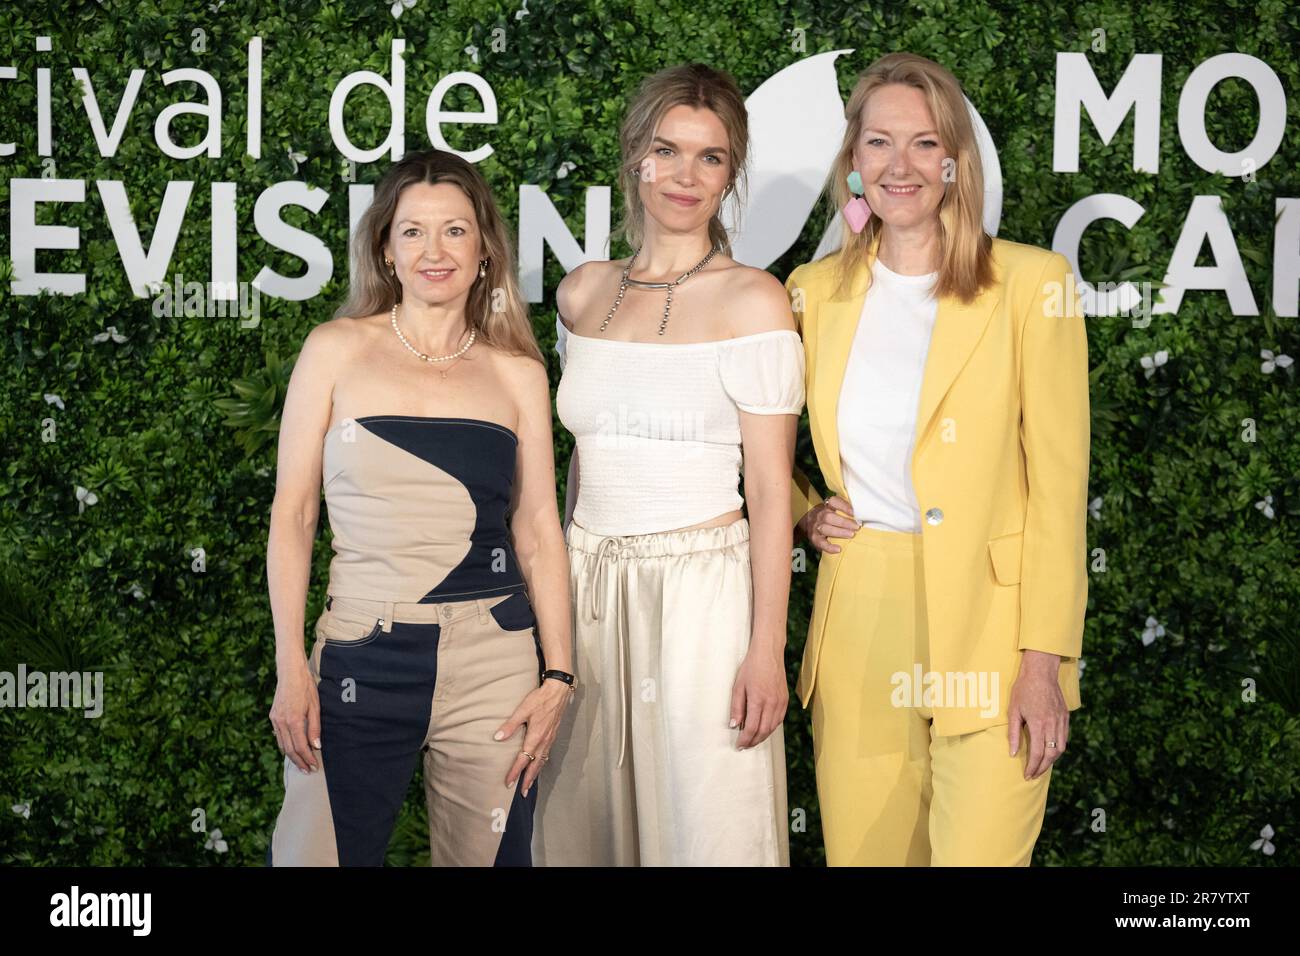 Monte Carlo, Monaco. 18th June, 2023. Louise Mieritz, Marie Bach Hansen and Ditte Hansen attend the Chorus Girls photocall during the 62nd Monte Carlo TV Festival on June 18, 2023 in Monte-Carlo, Monaco. Photo by David Niviere/ABACAPRESS.COM Credit: Abaca Press/Alamy Live News Stock Photo